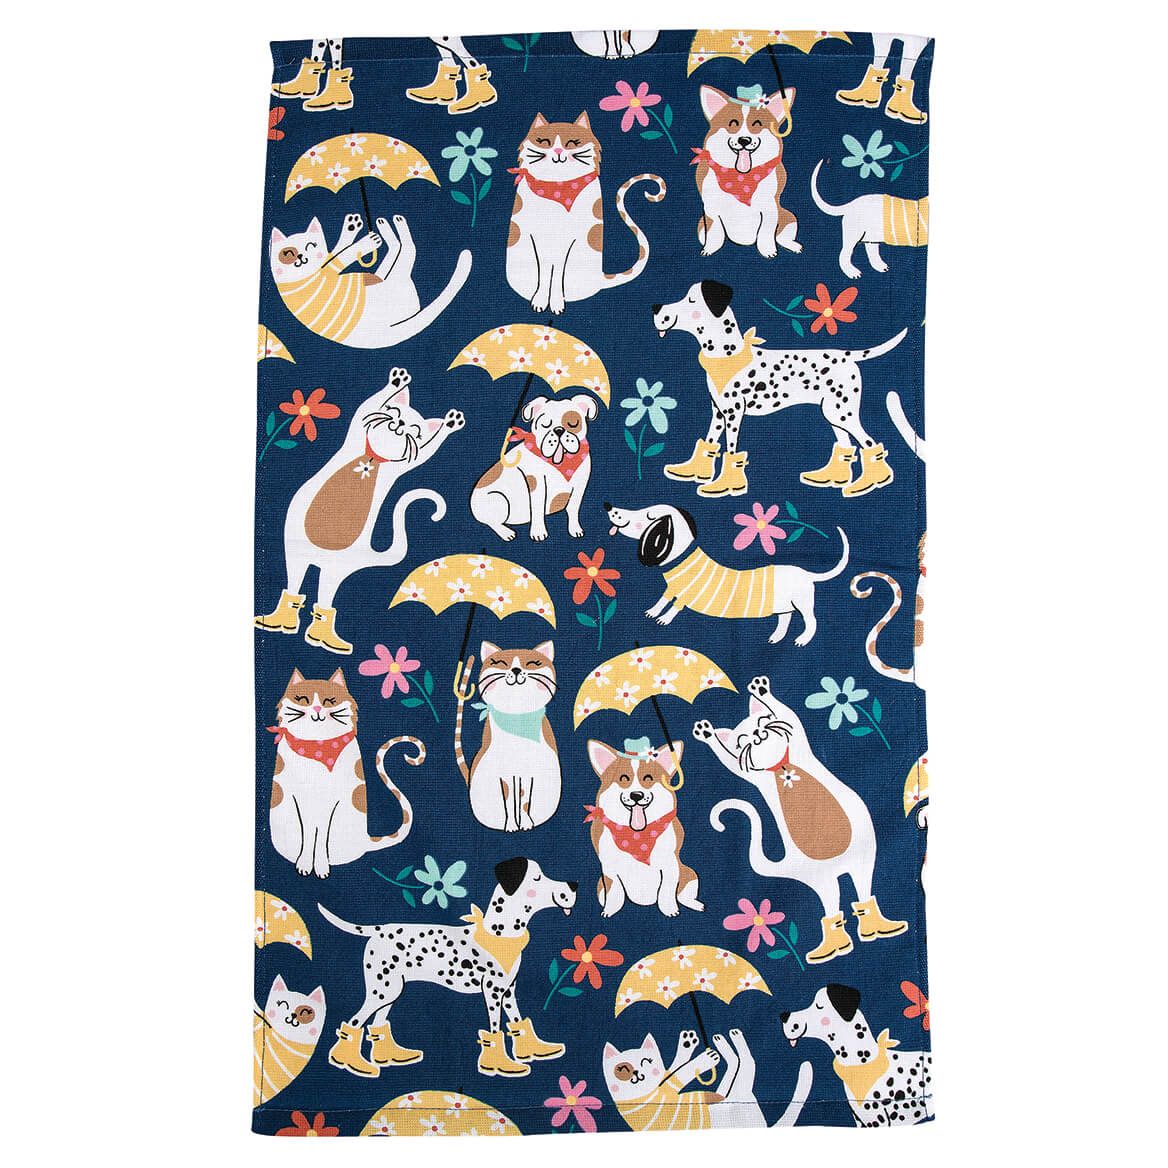 Raining Cats and Dogs Towel + '-' + 374616